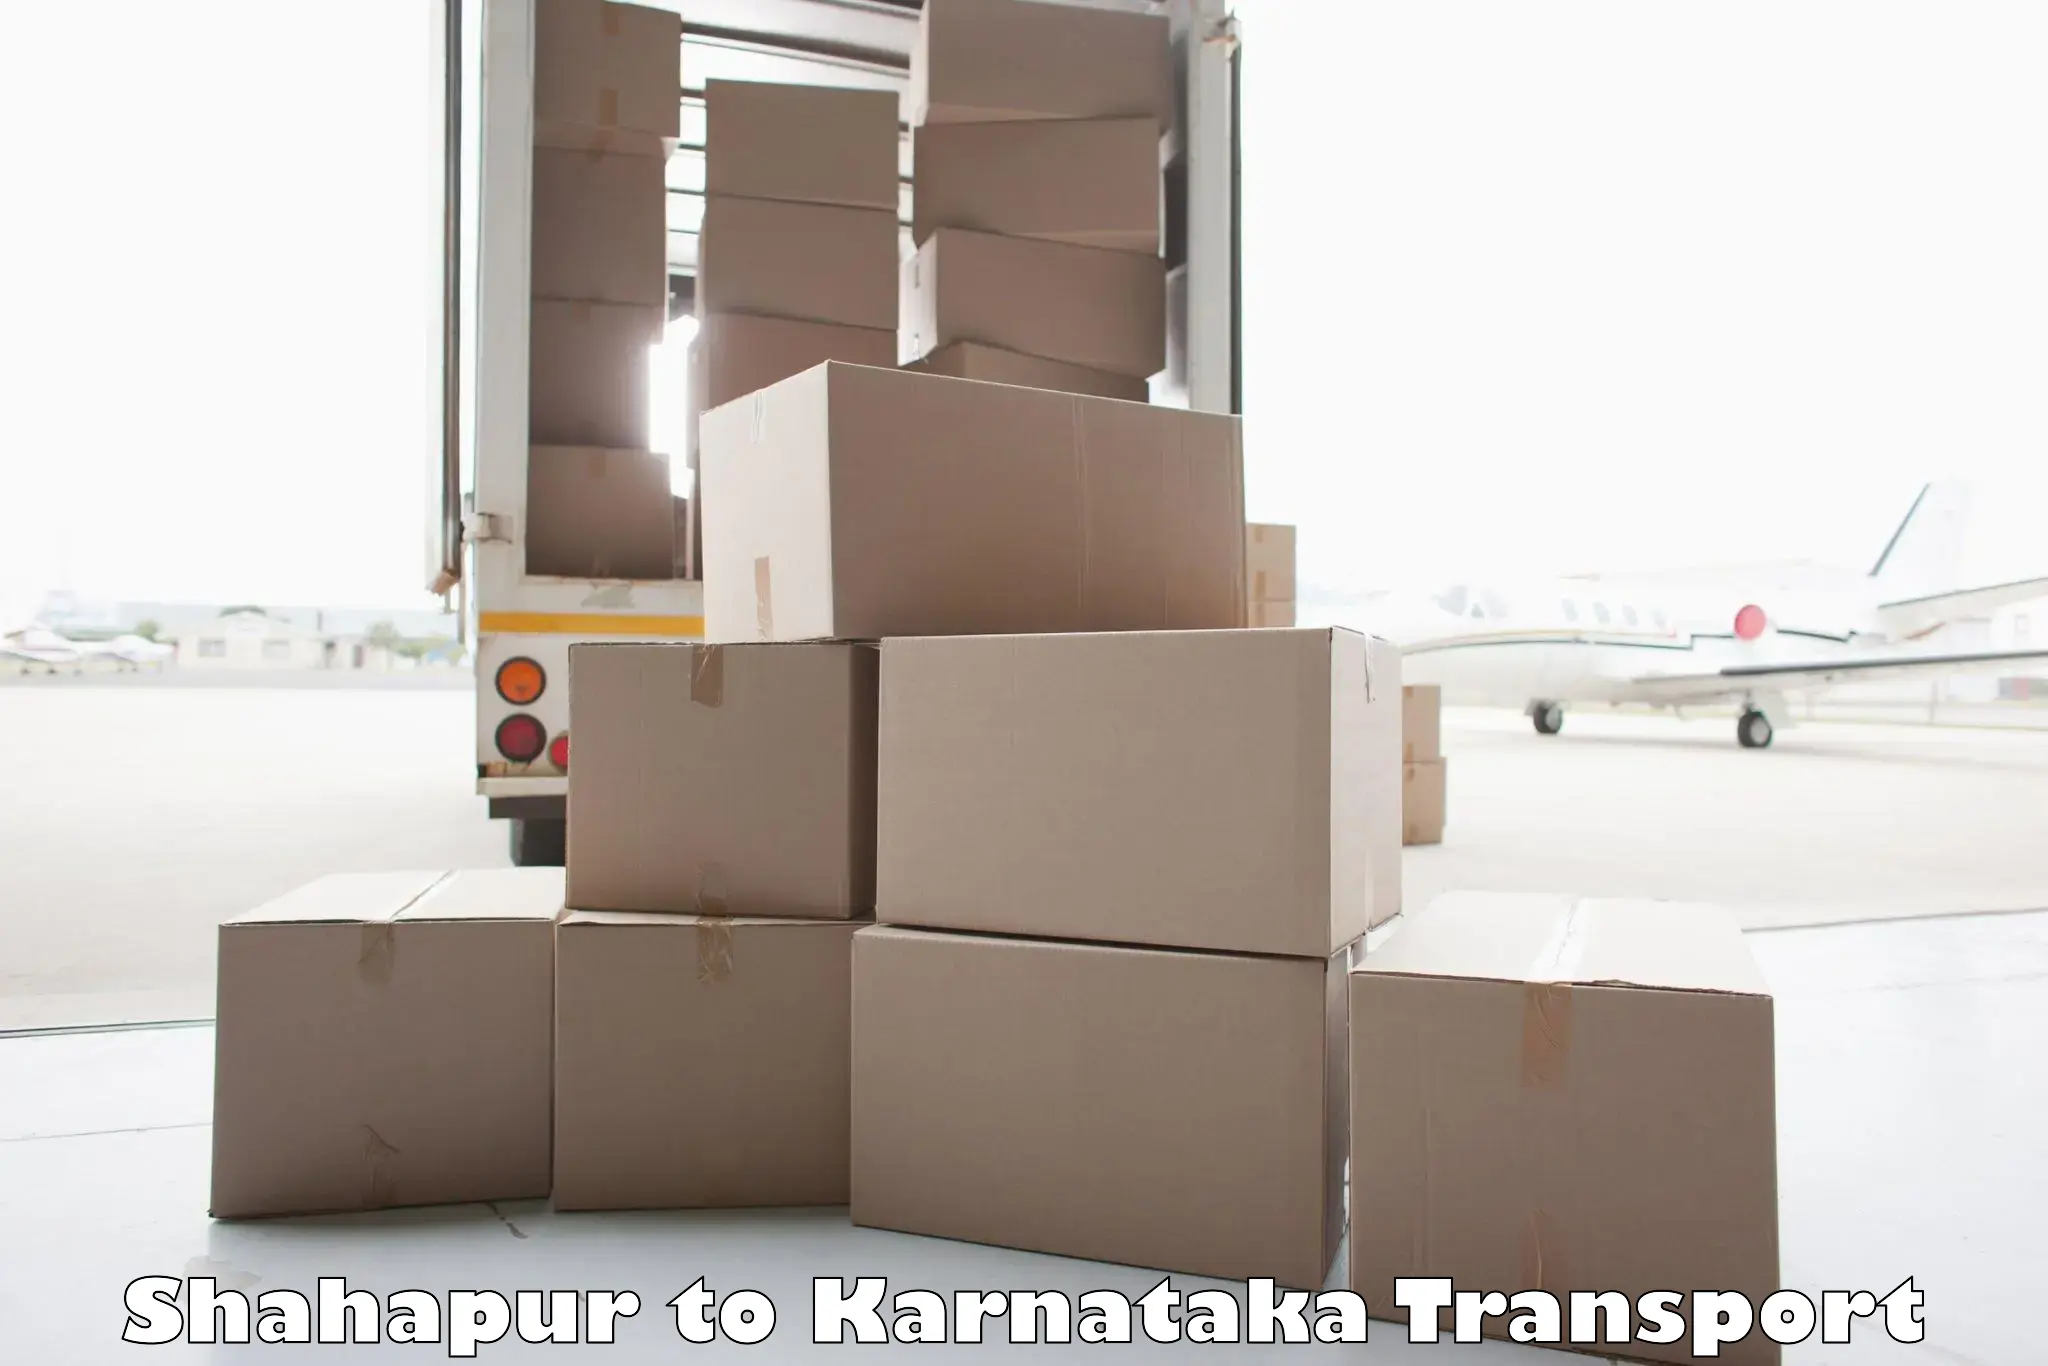 Online transport service Shahapur to Bantwal